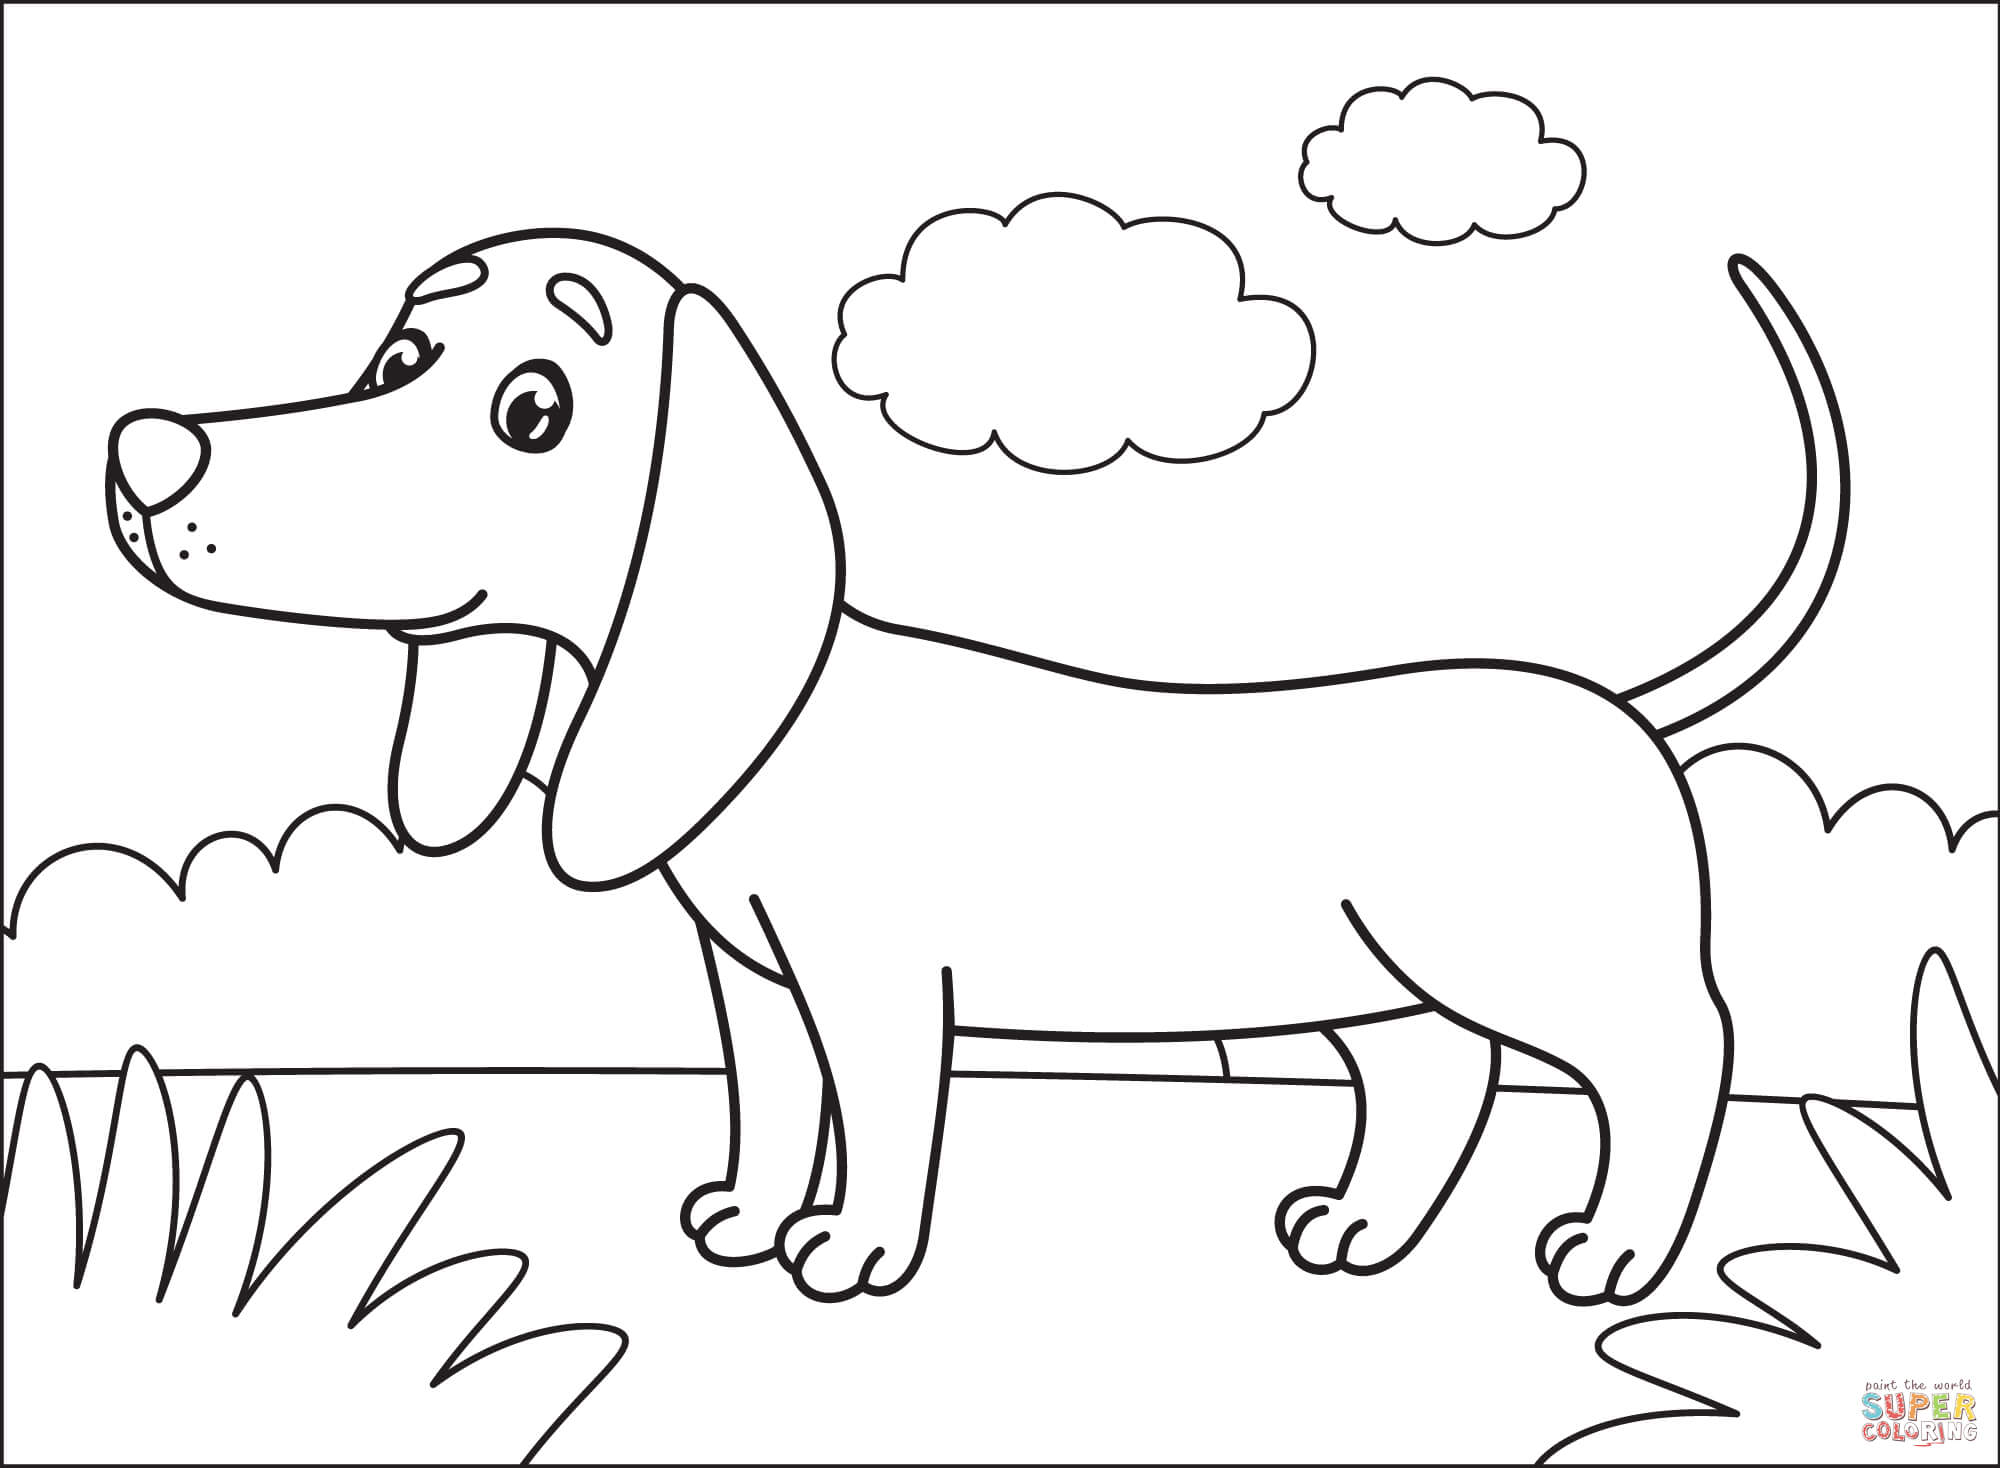 Dachshund coloring page free printable coloring pages